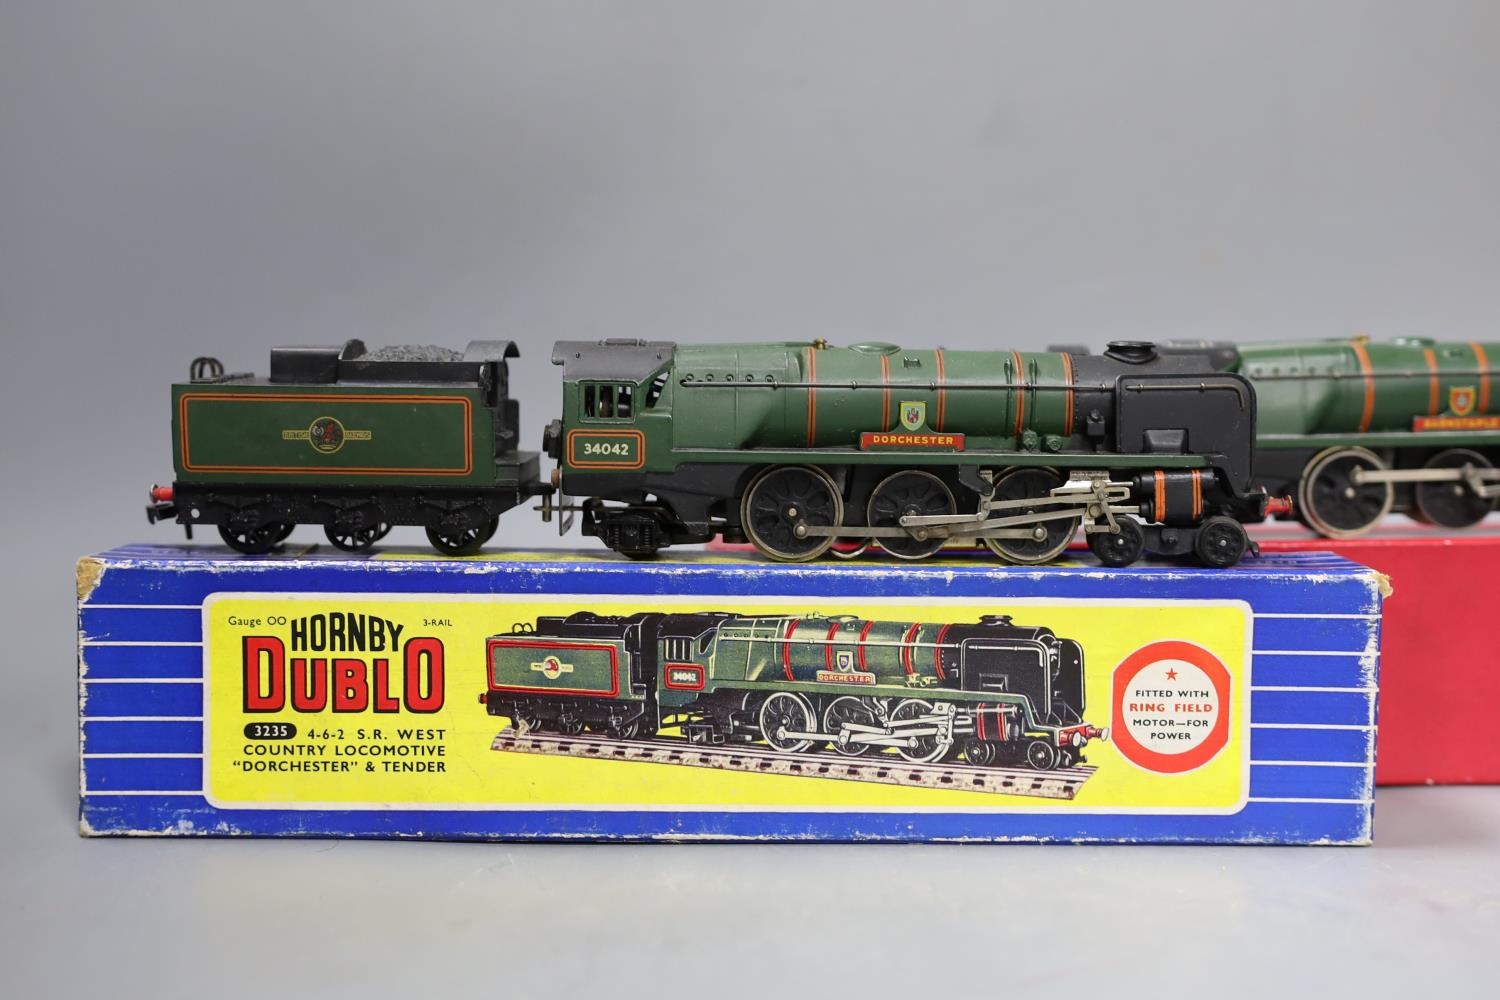 Two Hornby Dublo locomotives and tenders – 3235 4-6-2 S.R. West Country locomotive Dorchester and - Image 4 of 4